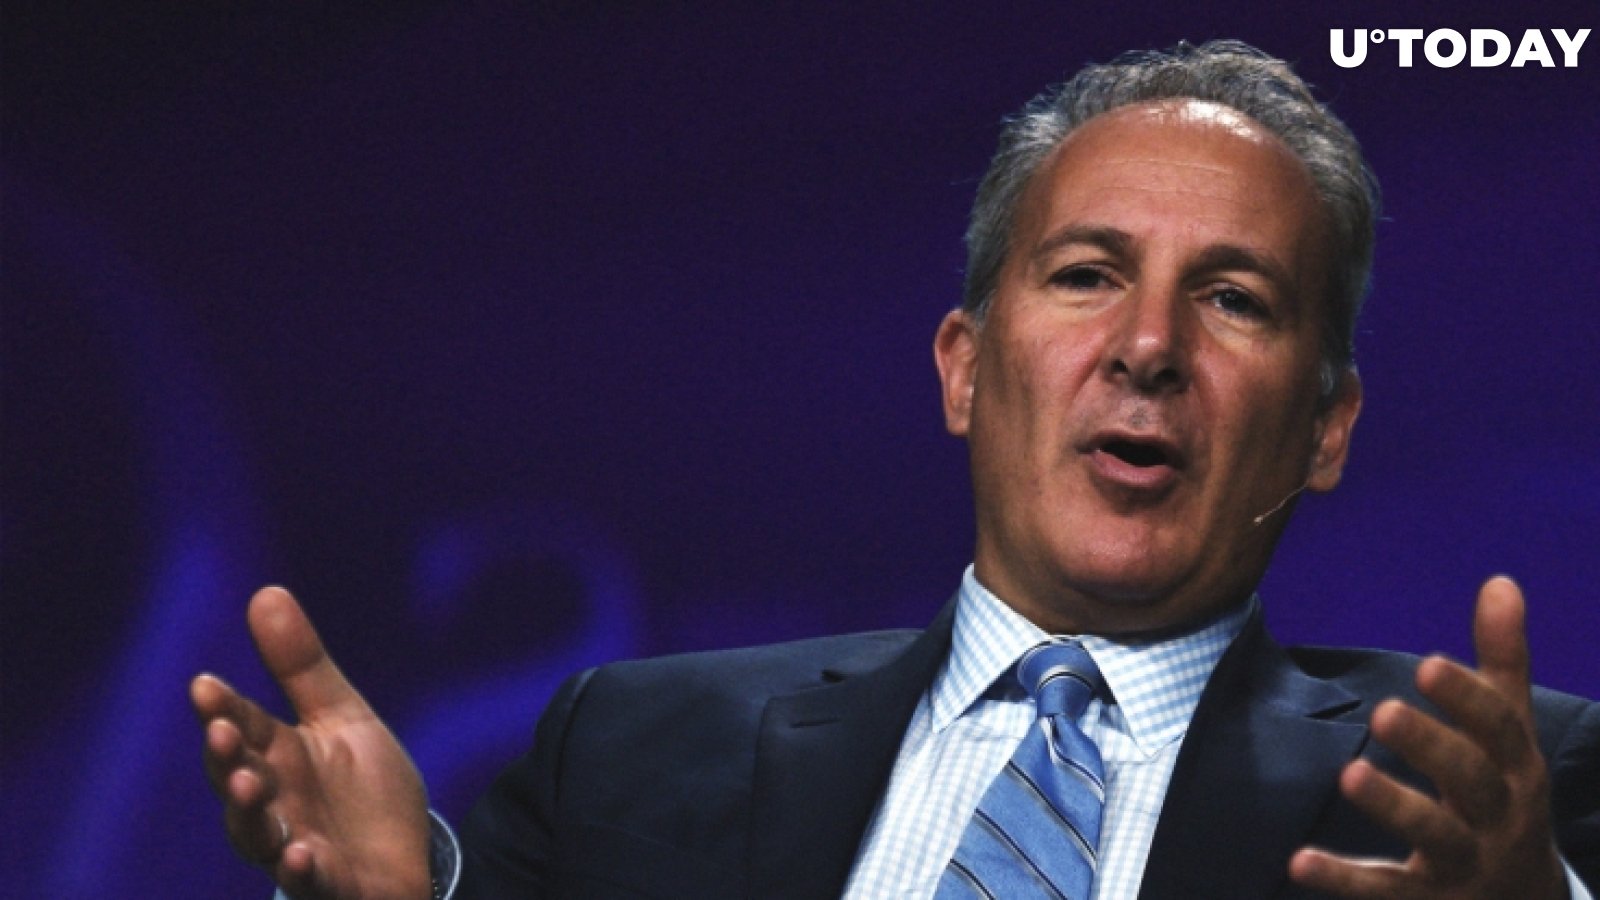 Peter Schiff Says Owning Bitcoin (BTC) Was 'Bad Idea' After Losing Access to His Wallet